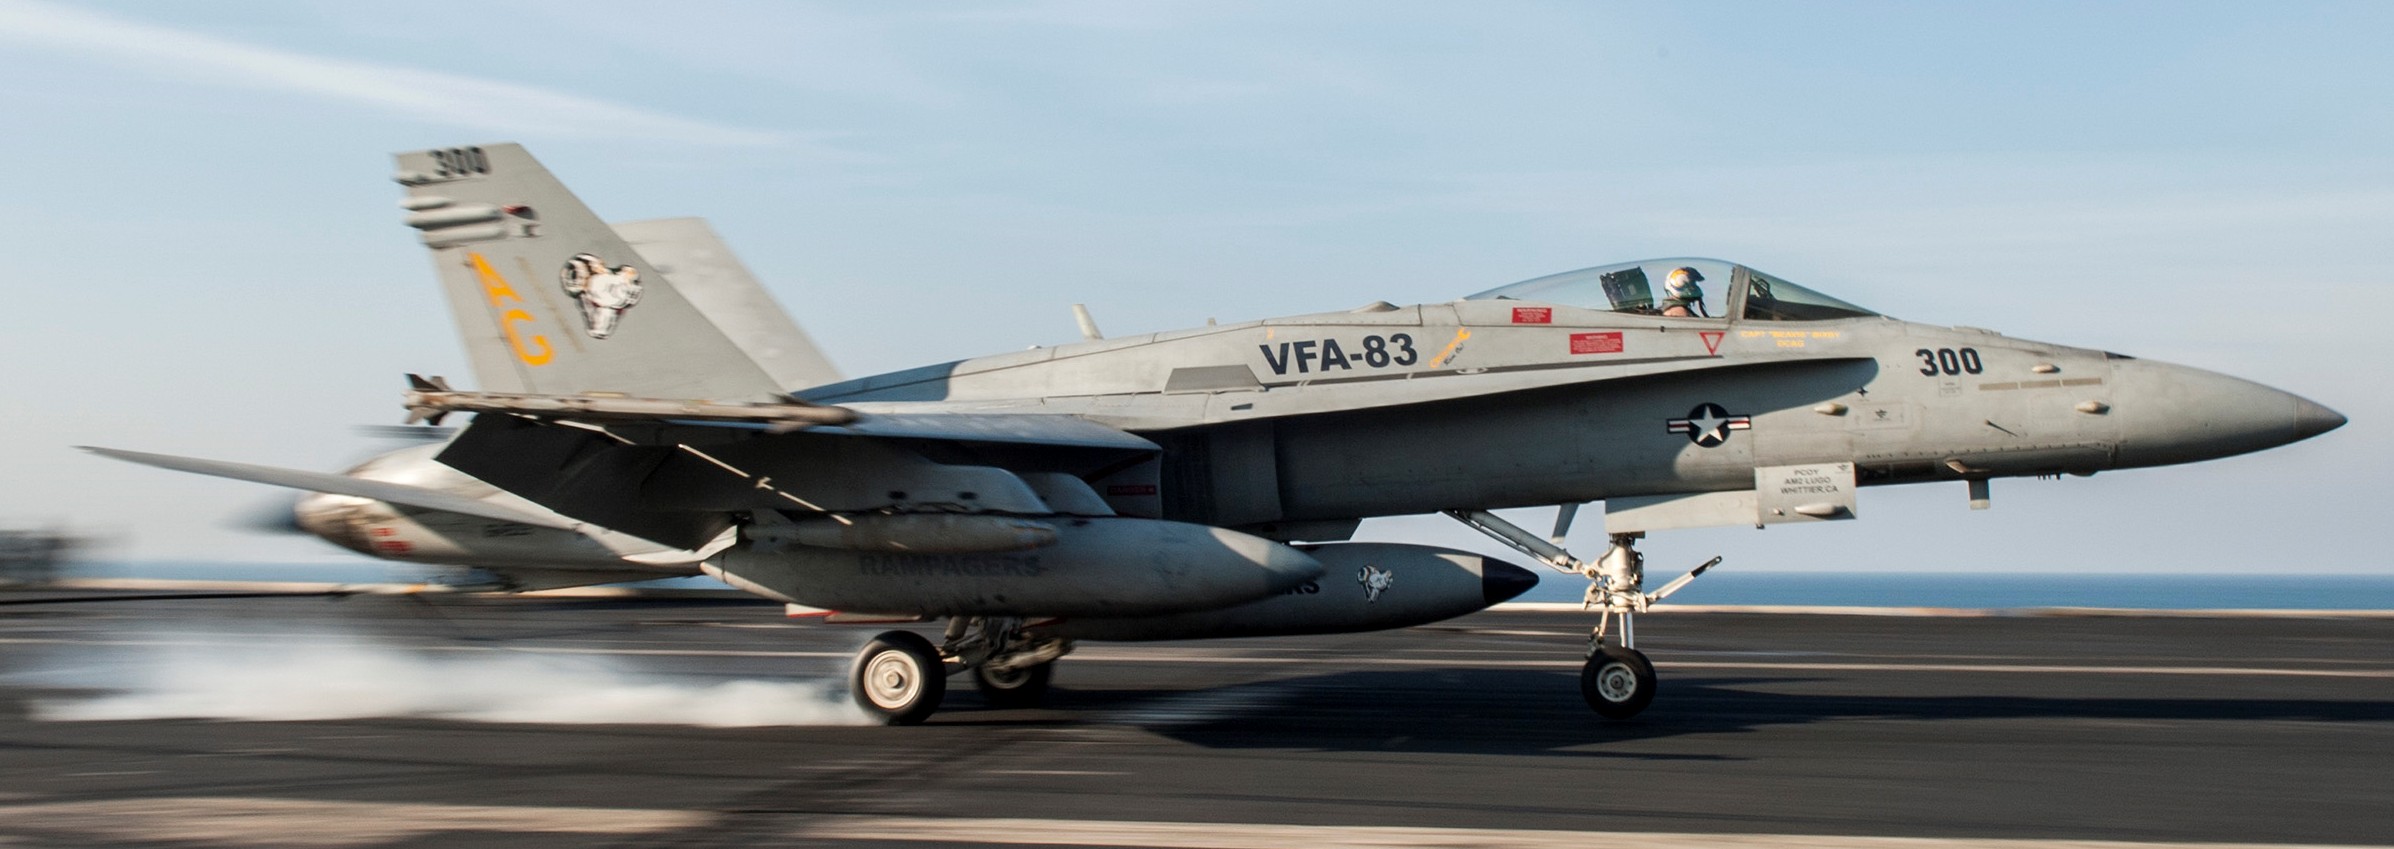 vfa-83 rampagers strike fighter squadron f/a-18c hornet cvw-7 uss harry s. truman cvn-75 60p